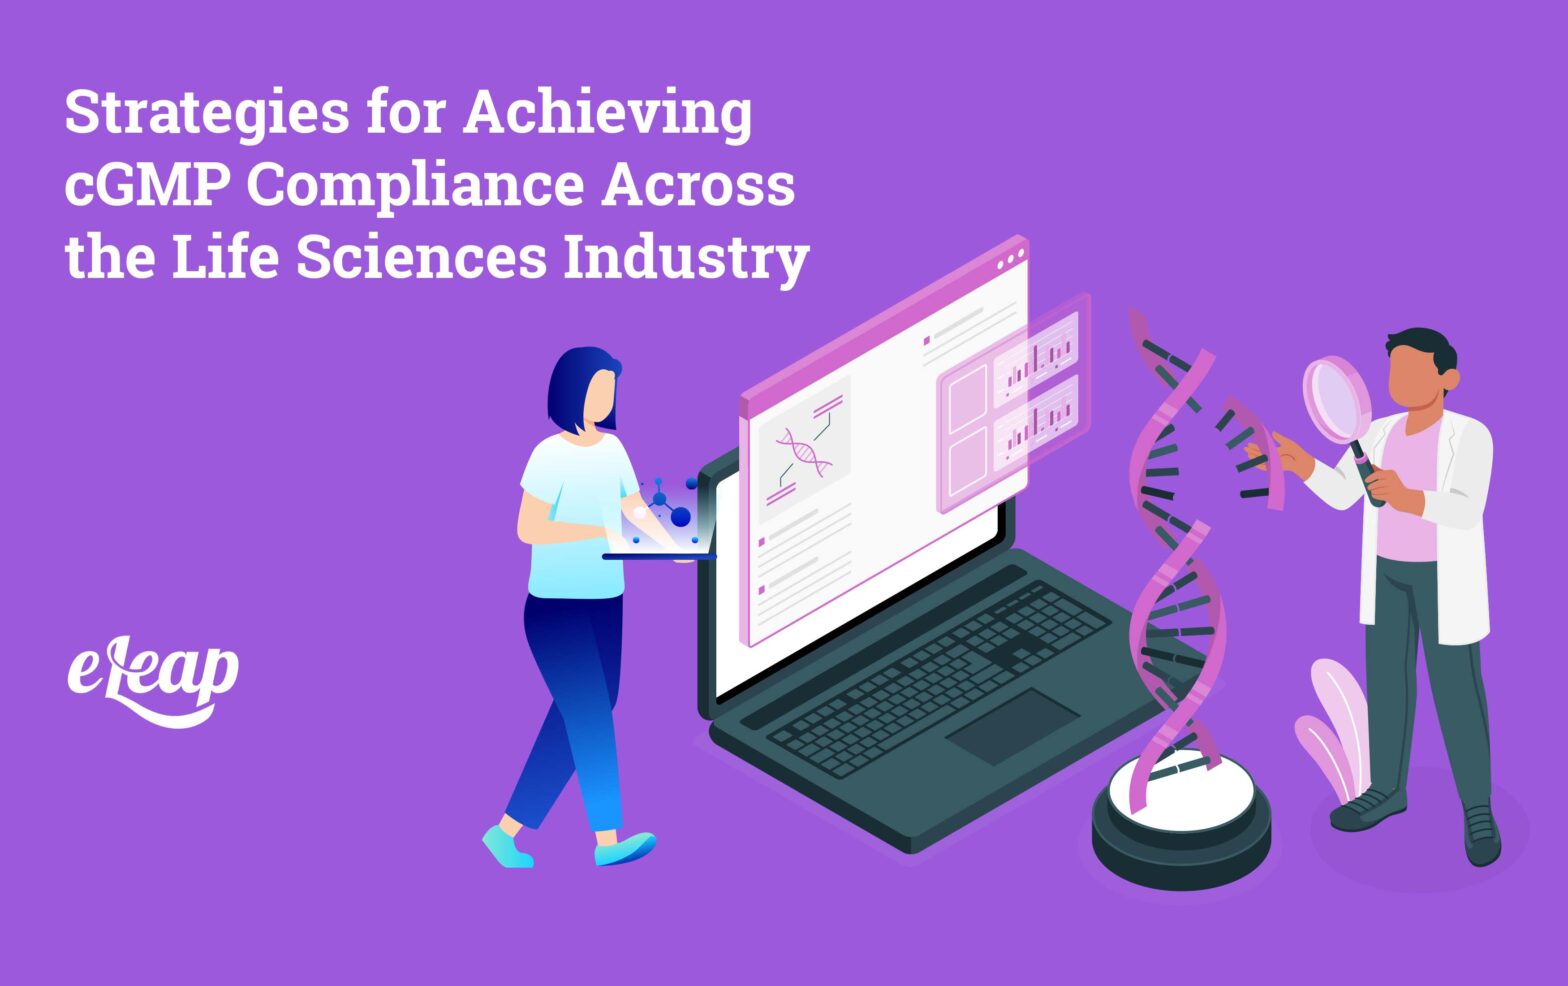 Strategies for Achieving cGMP Compliance Across the Life Sciences Industry